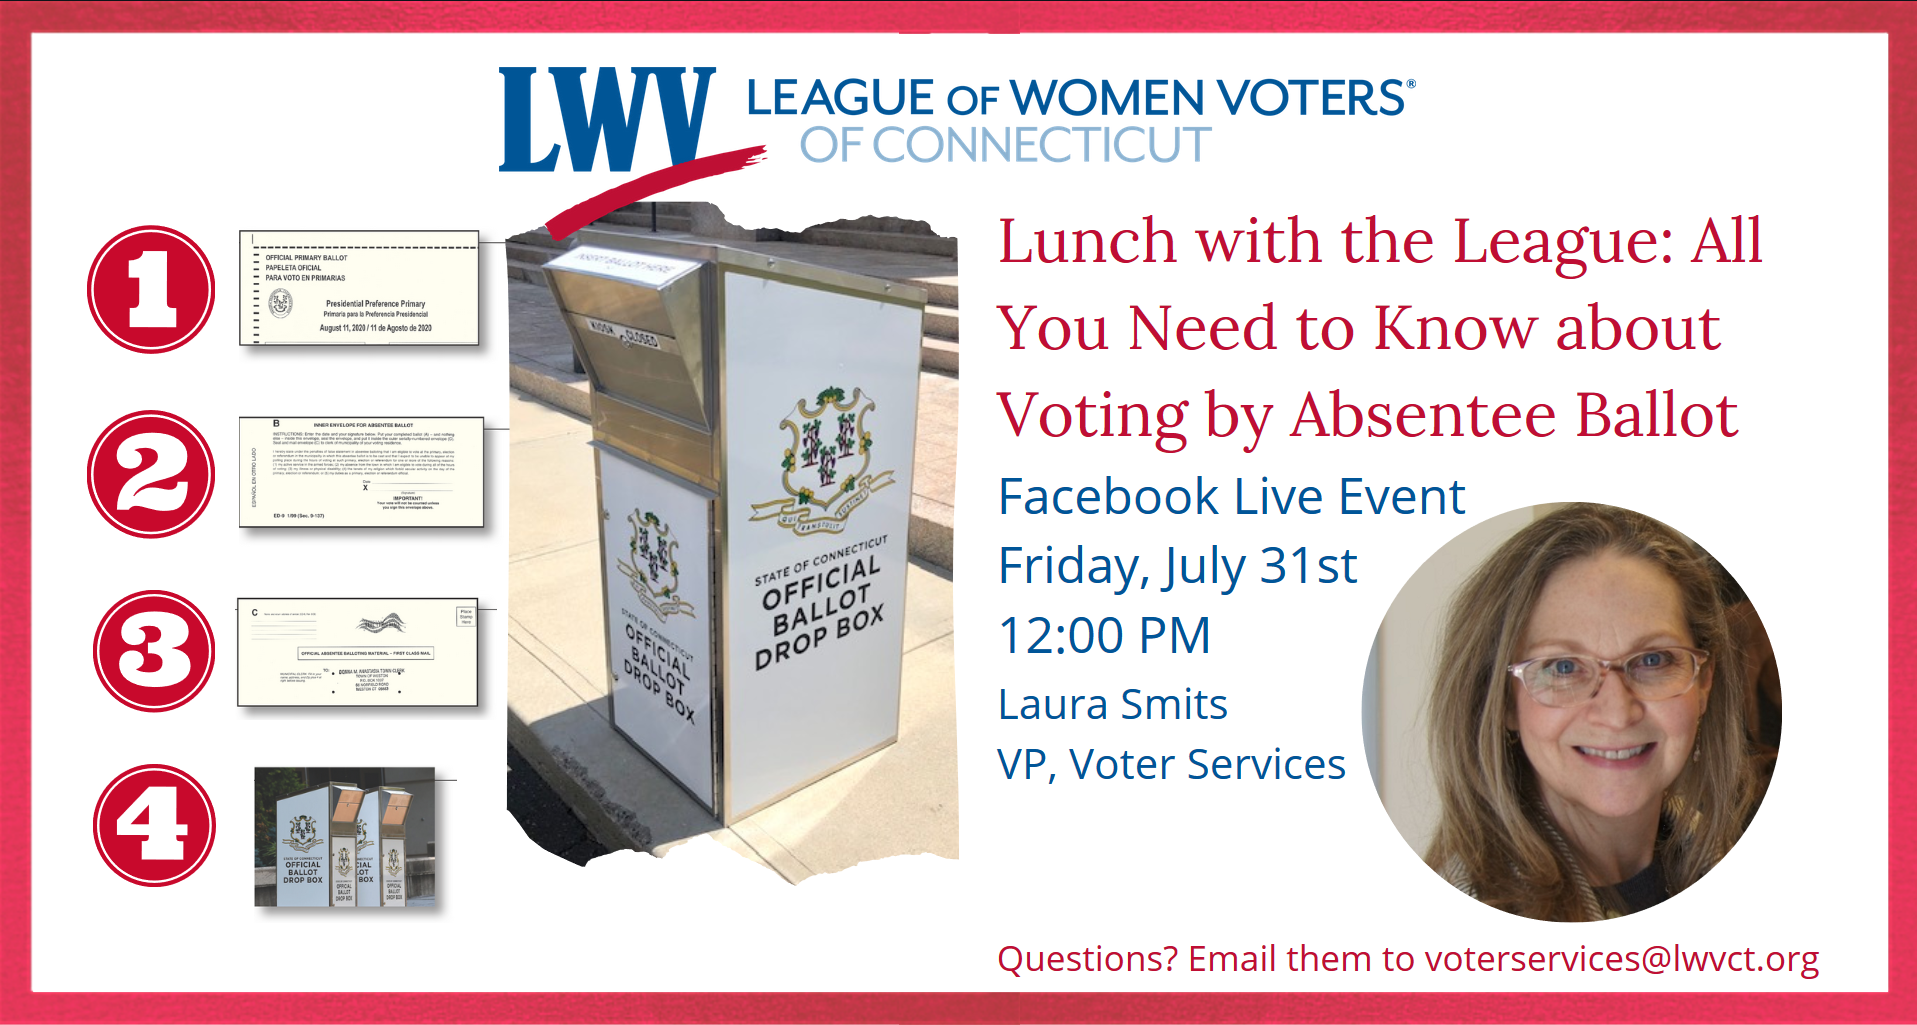 Lunch with the League All You Need to Know About Voting by Absentee Ballot July 31 Event Image